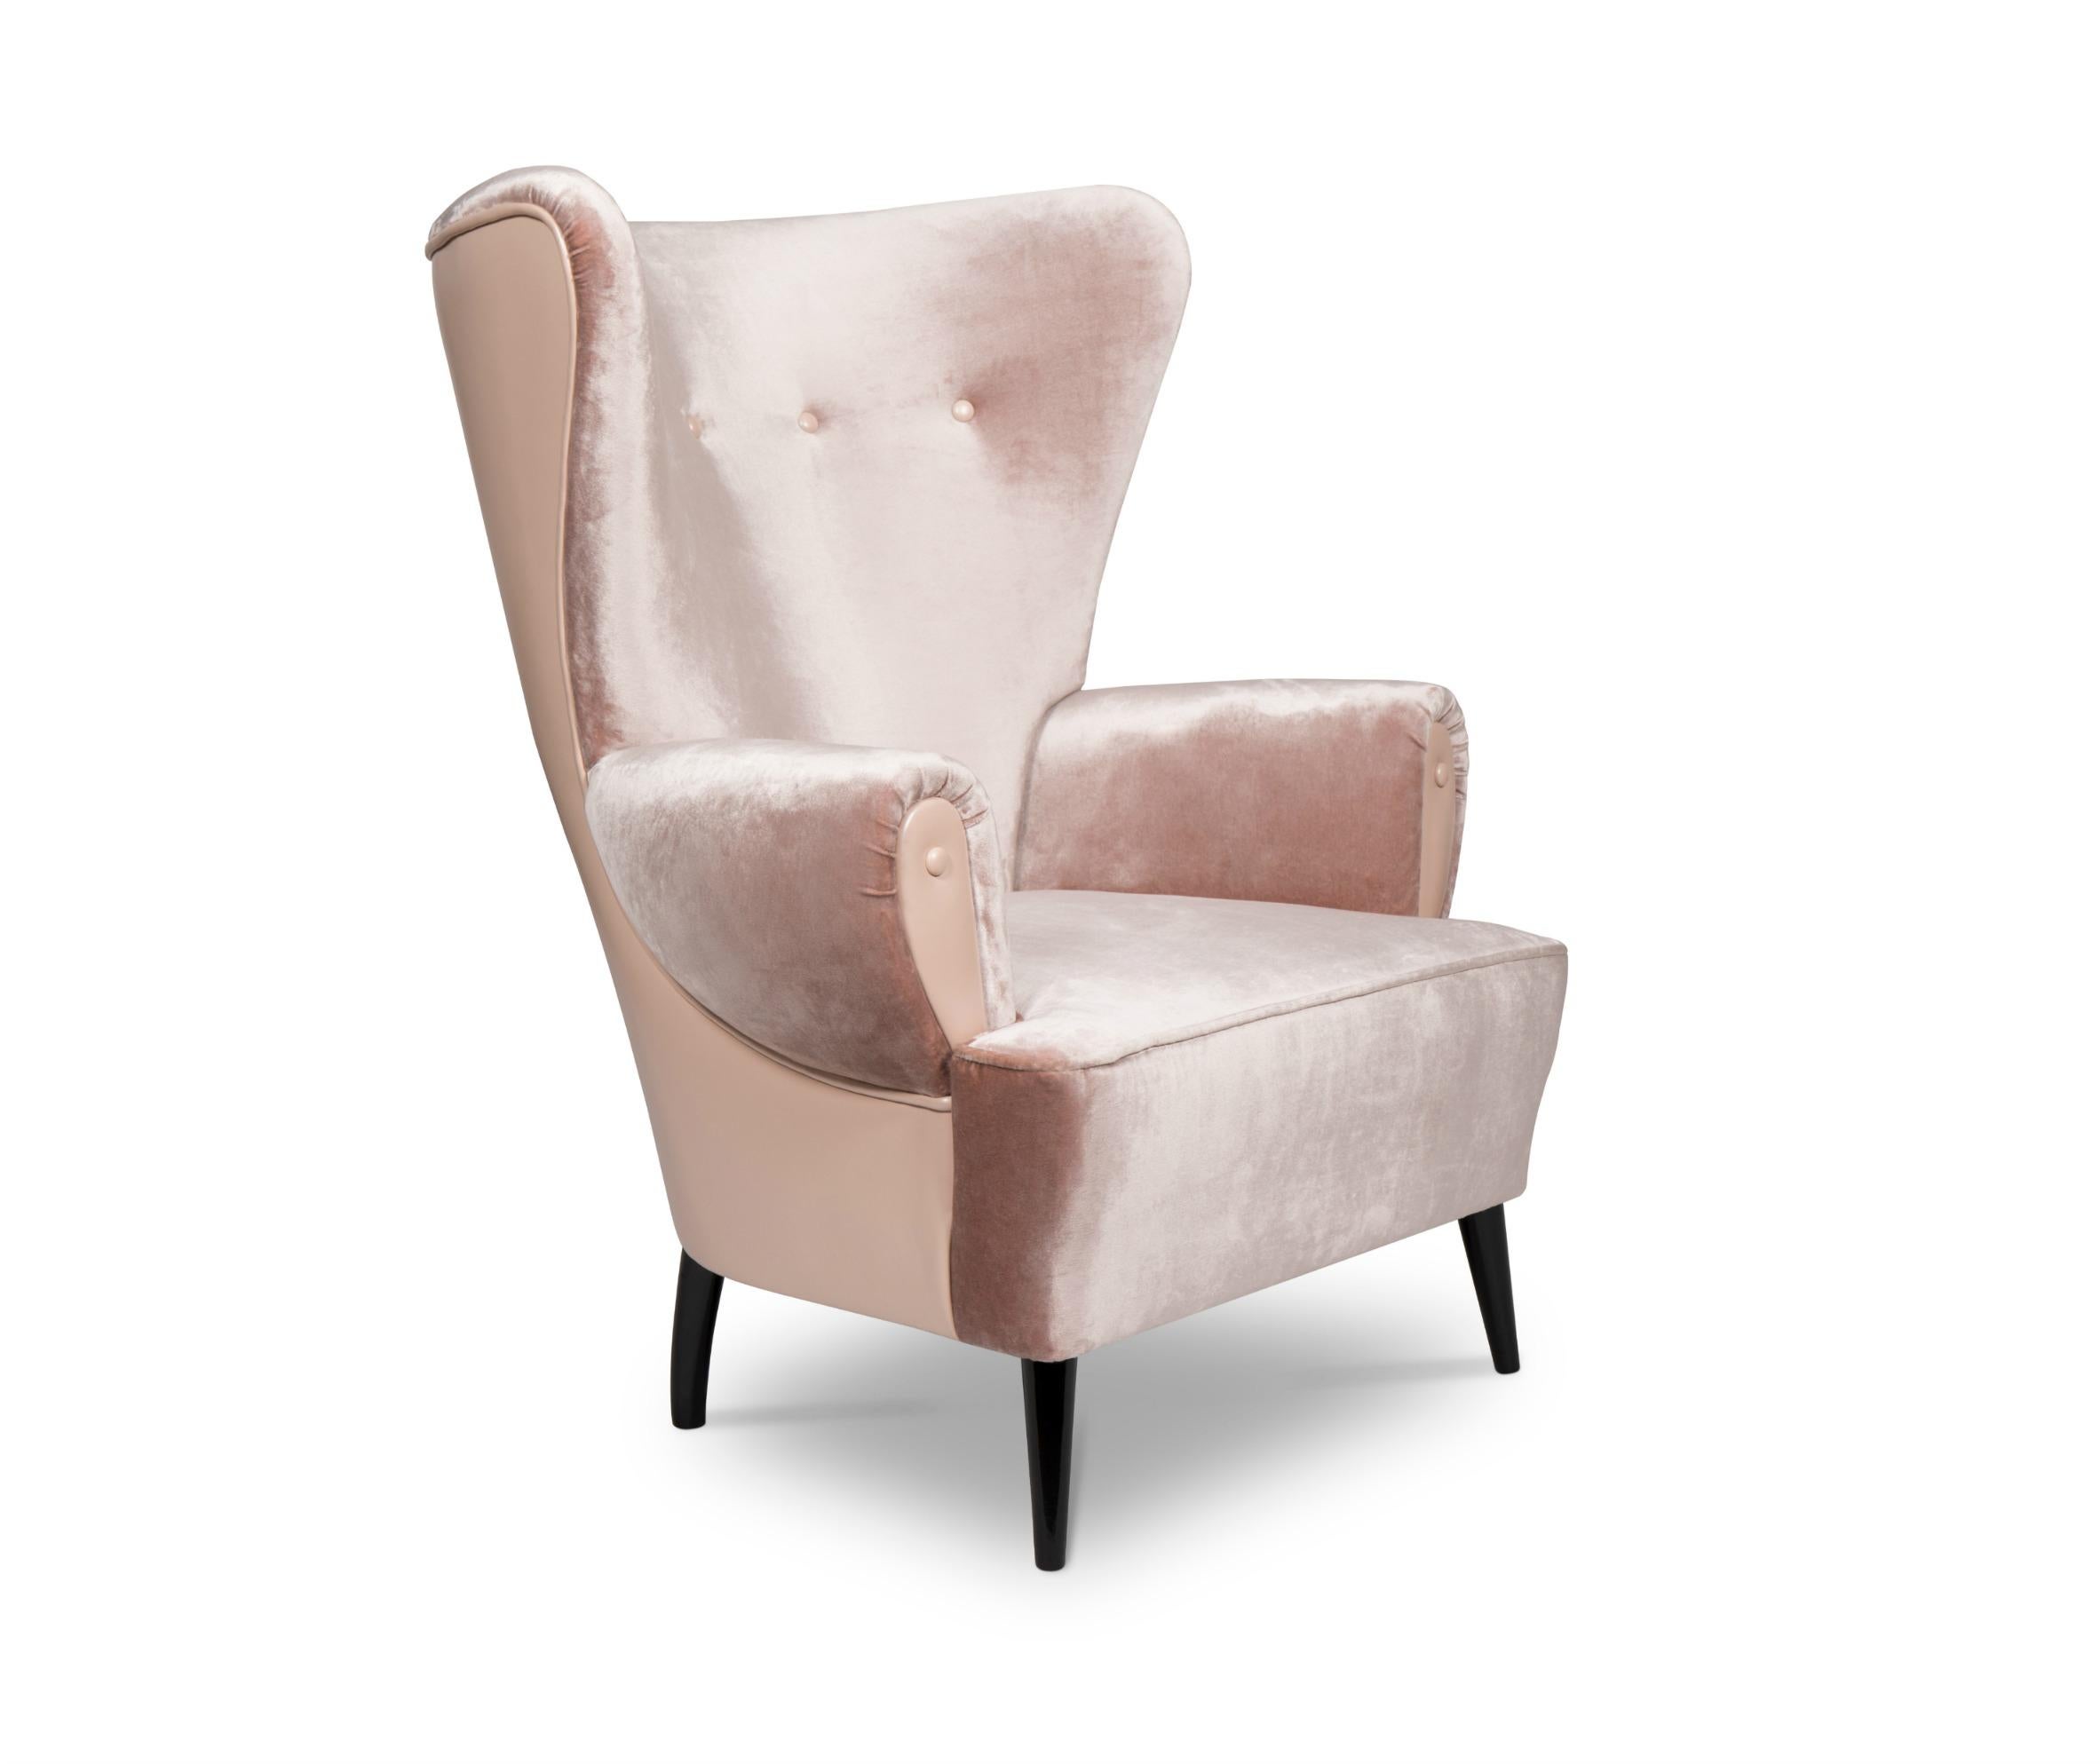 Bishop and Clerk is an imposing mountain peak in Australia with a magnificent view. It inspired CLERK Wingback Chair, a striking upholstered chair in cotton velvet and legs in high glossy lacquered. This wing chair will surely spice up any living